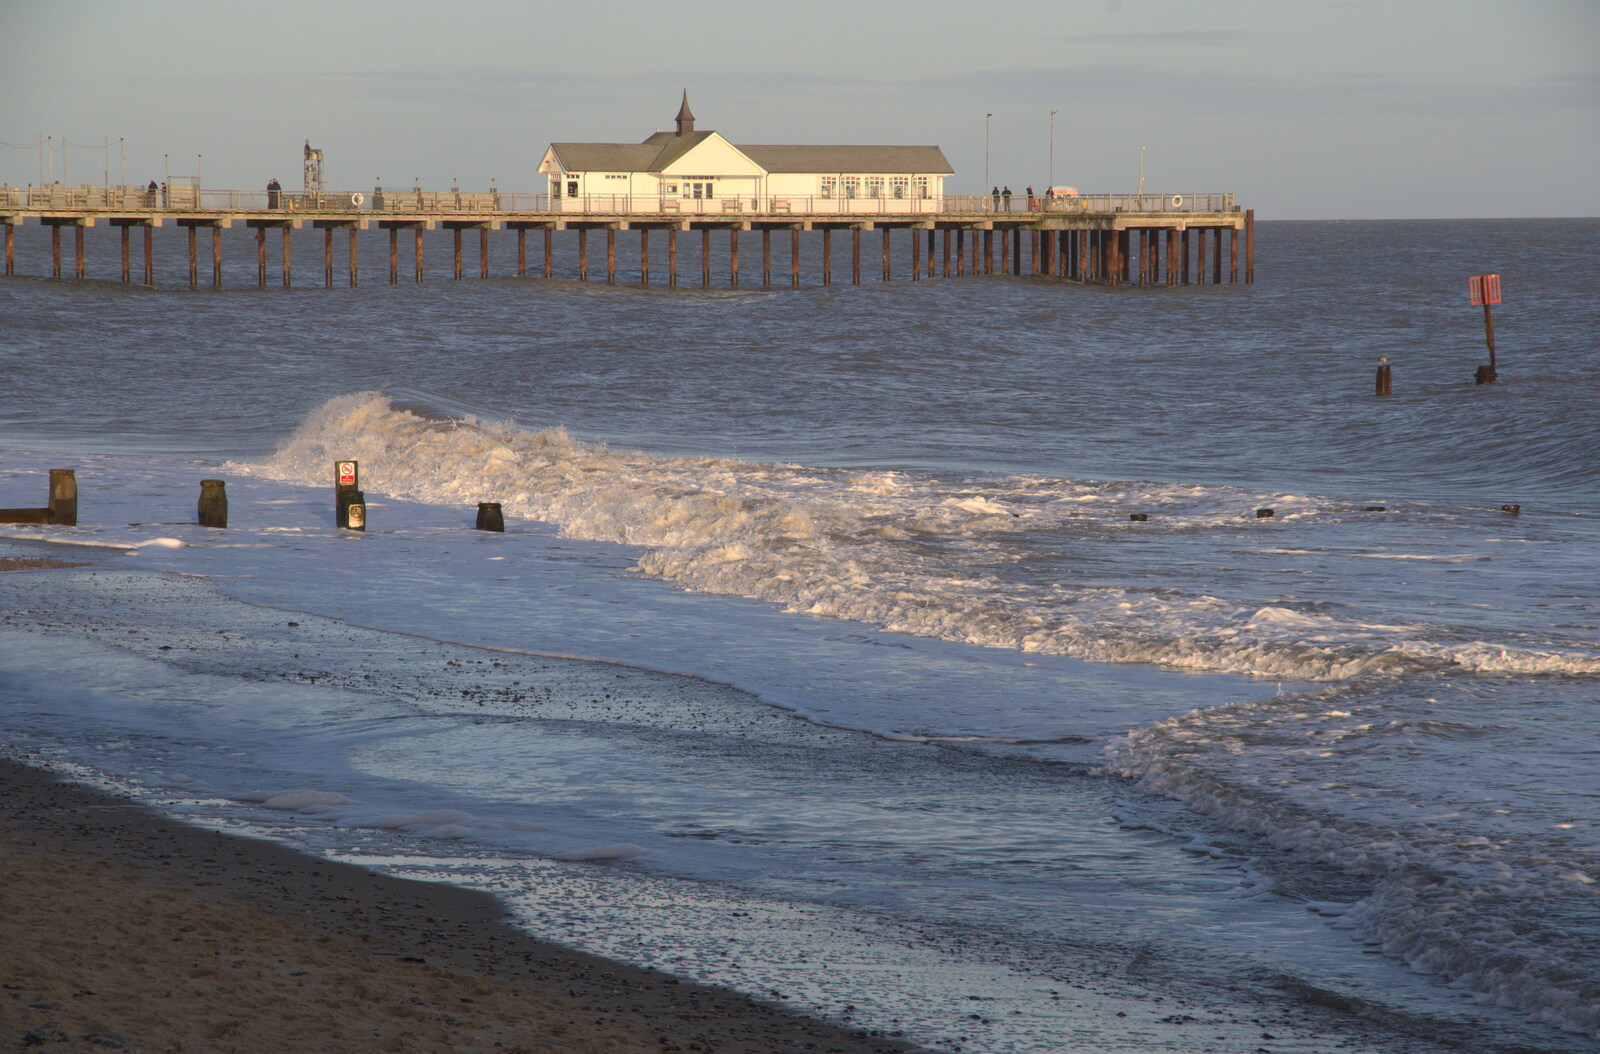 The end of the pier from A Return to the Beach, Southwold, Suffolk - 20th December 2020